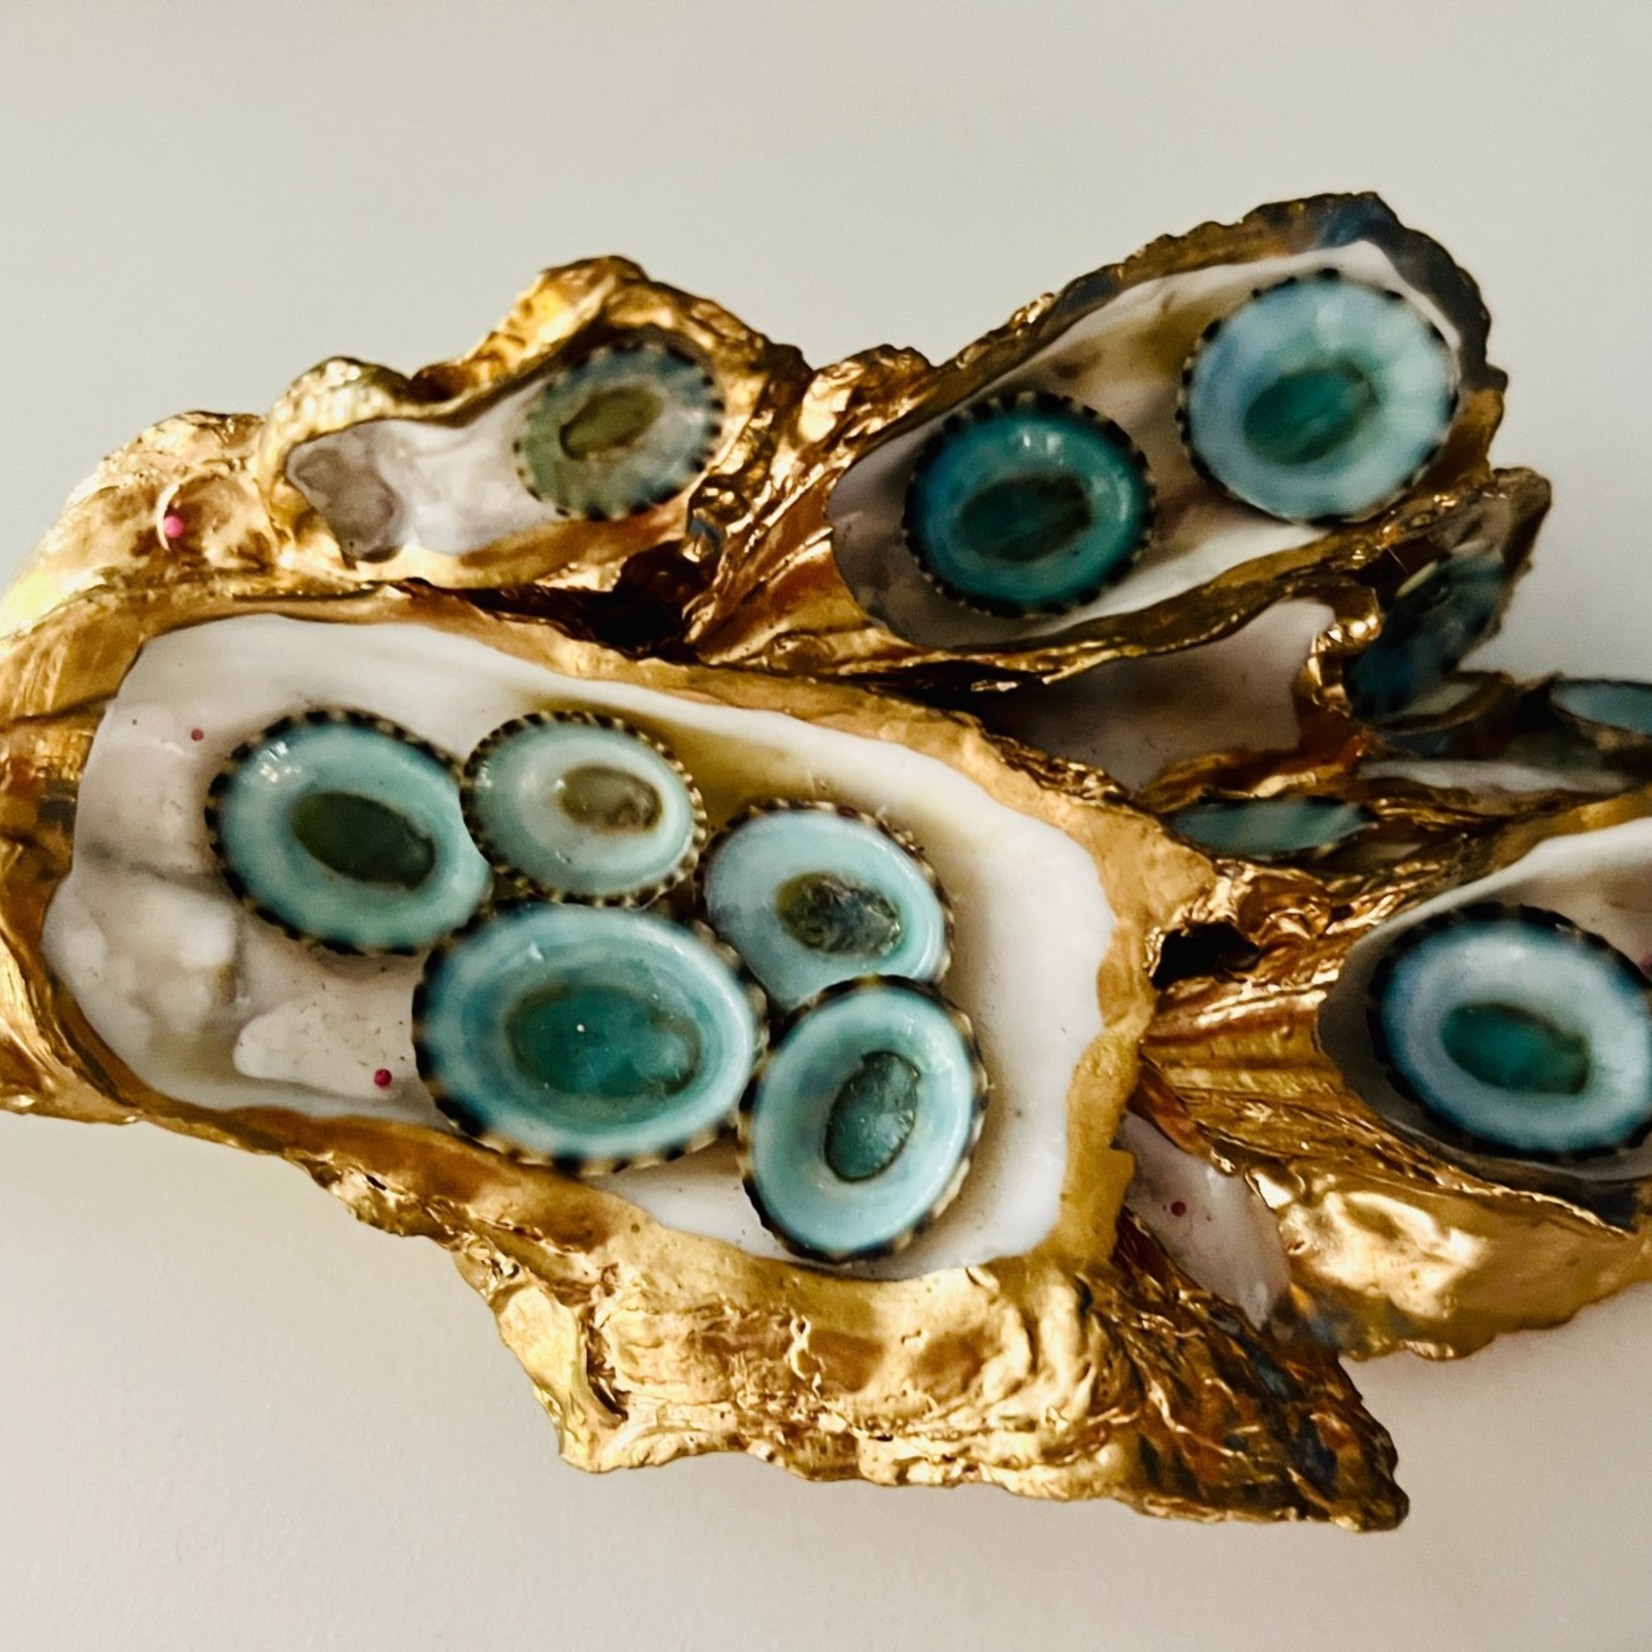 Pam Maschal Gold Leaf Wild Oyster cluster w/turquoise Mexican limpets, PAMM